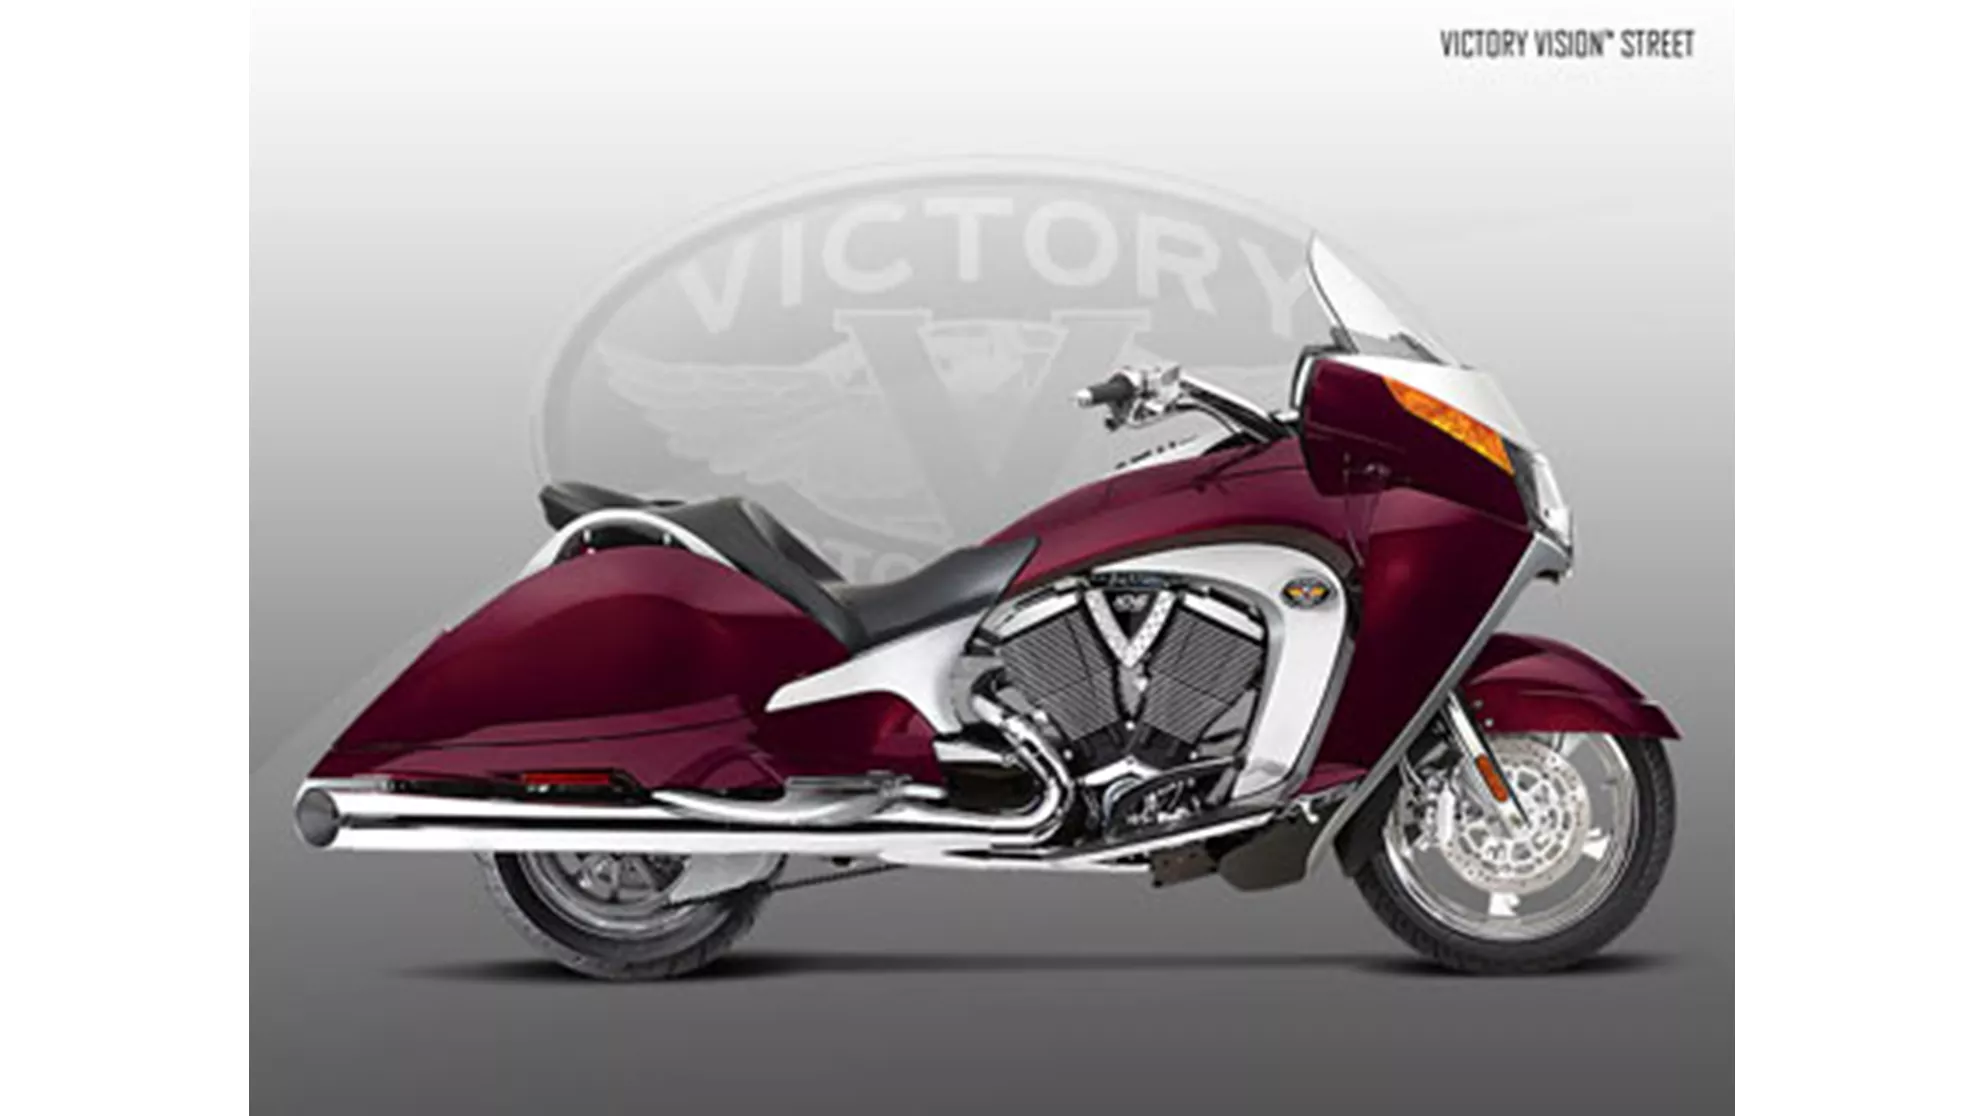 Victory Vision Street - Image 1